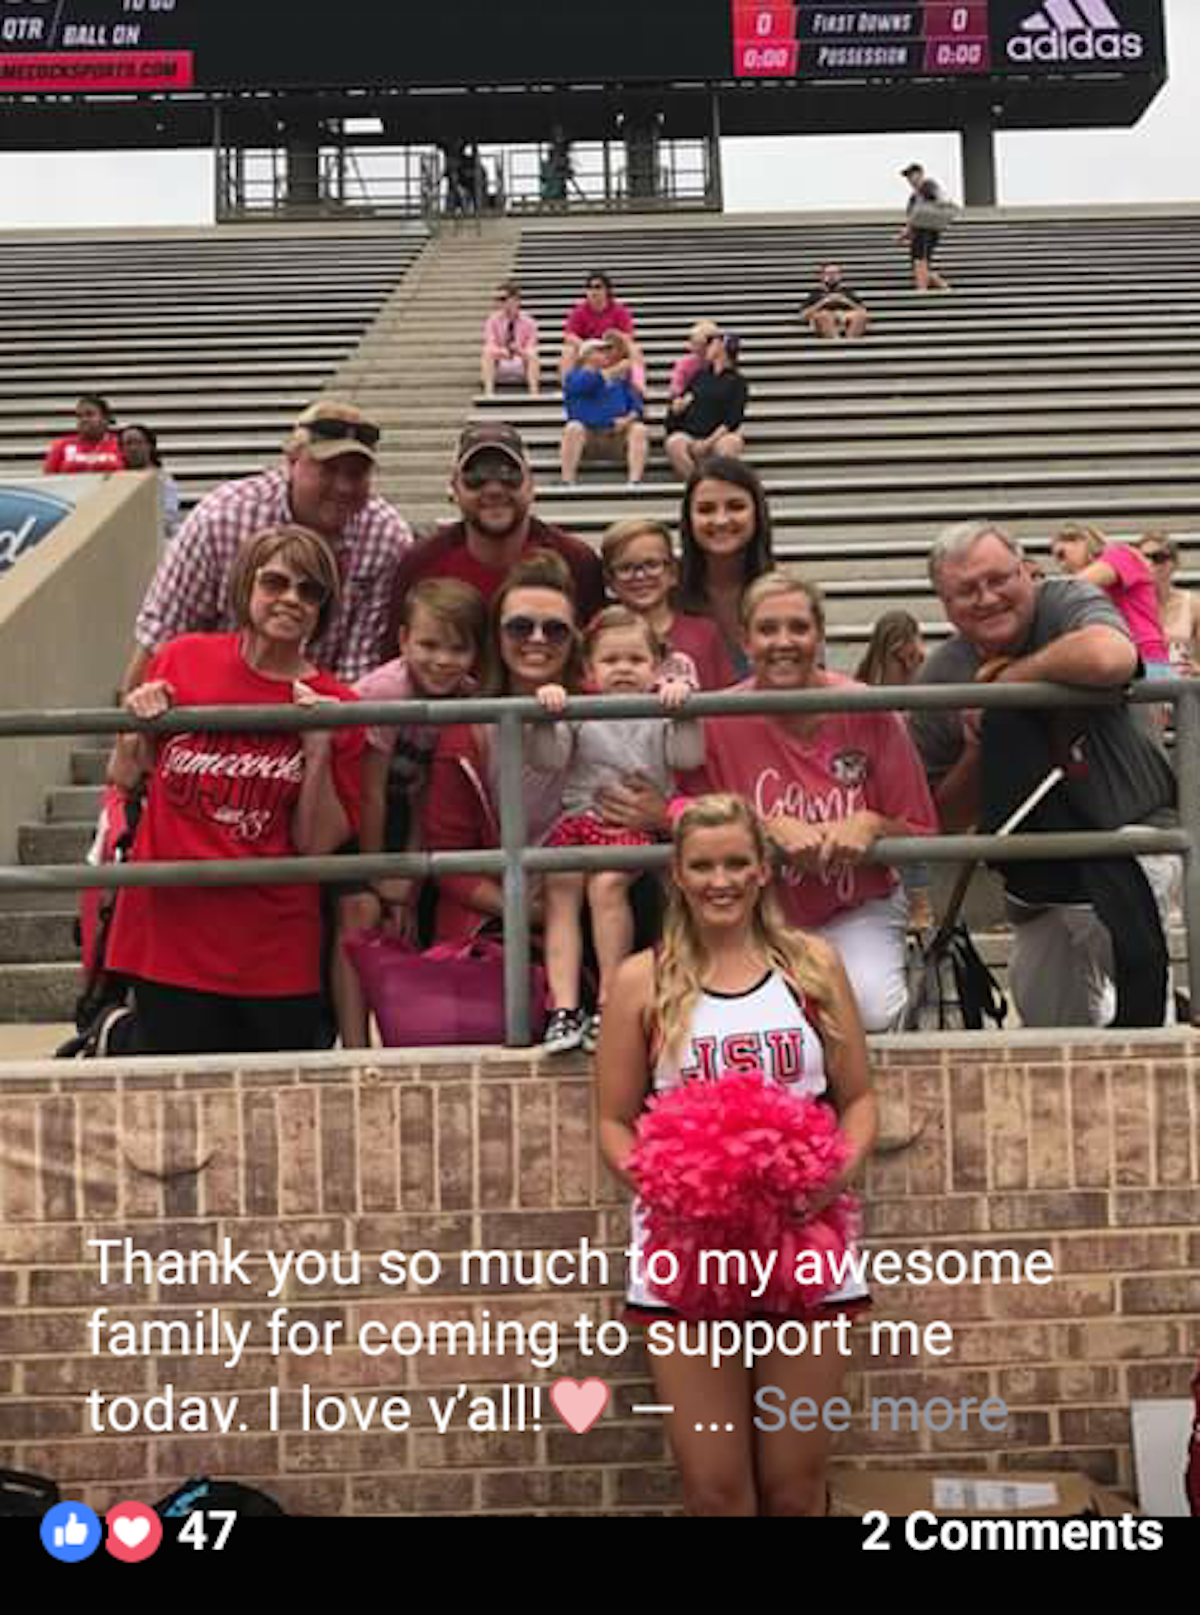 Me, wife, kids, and grandkids at Jacksonville State University football game. My middle granddaughter Hilary is cheerleader there